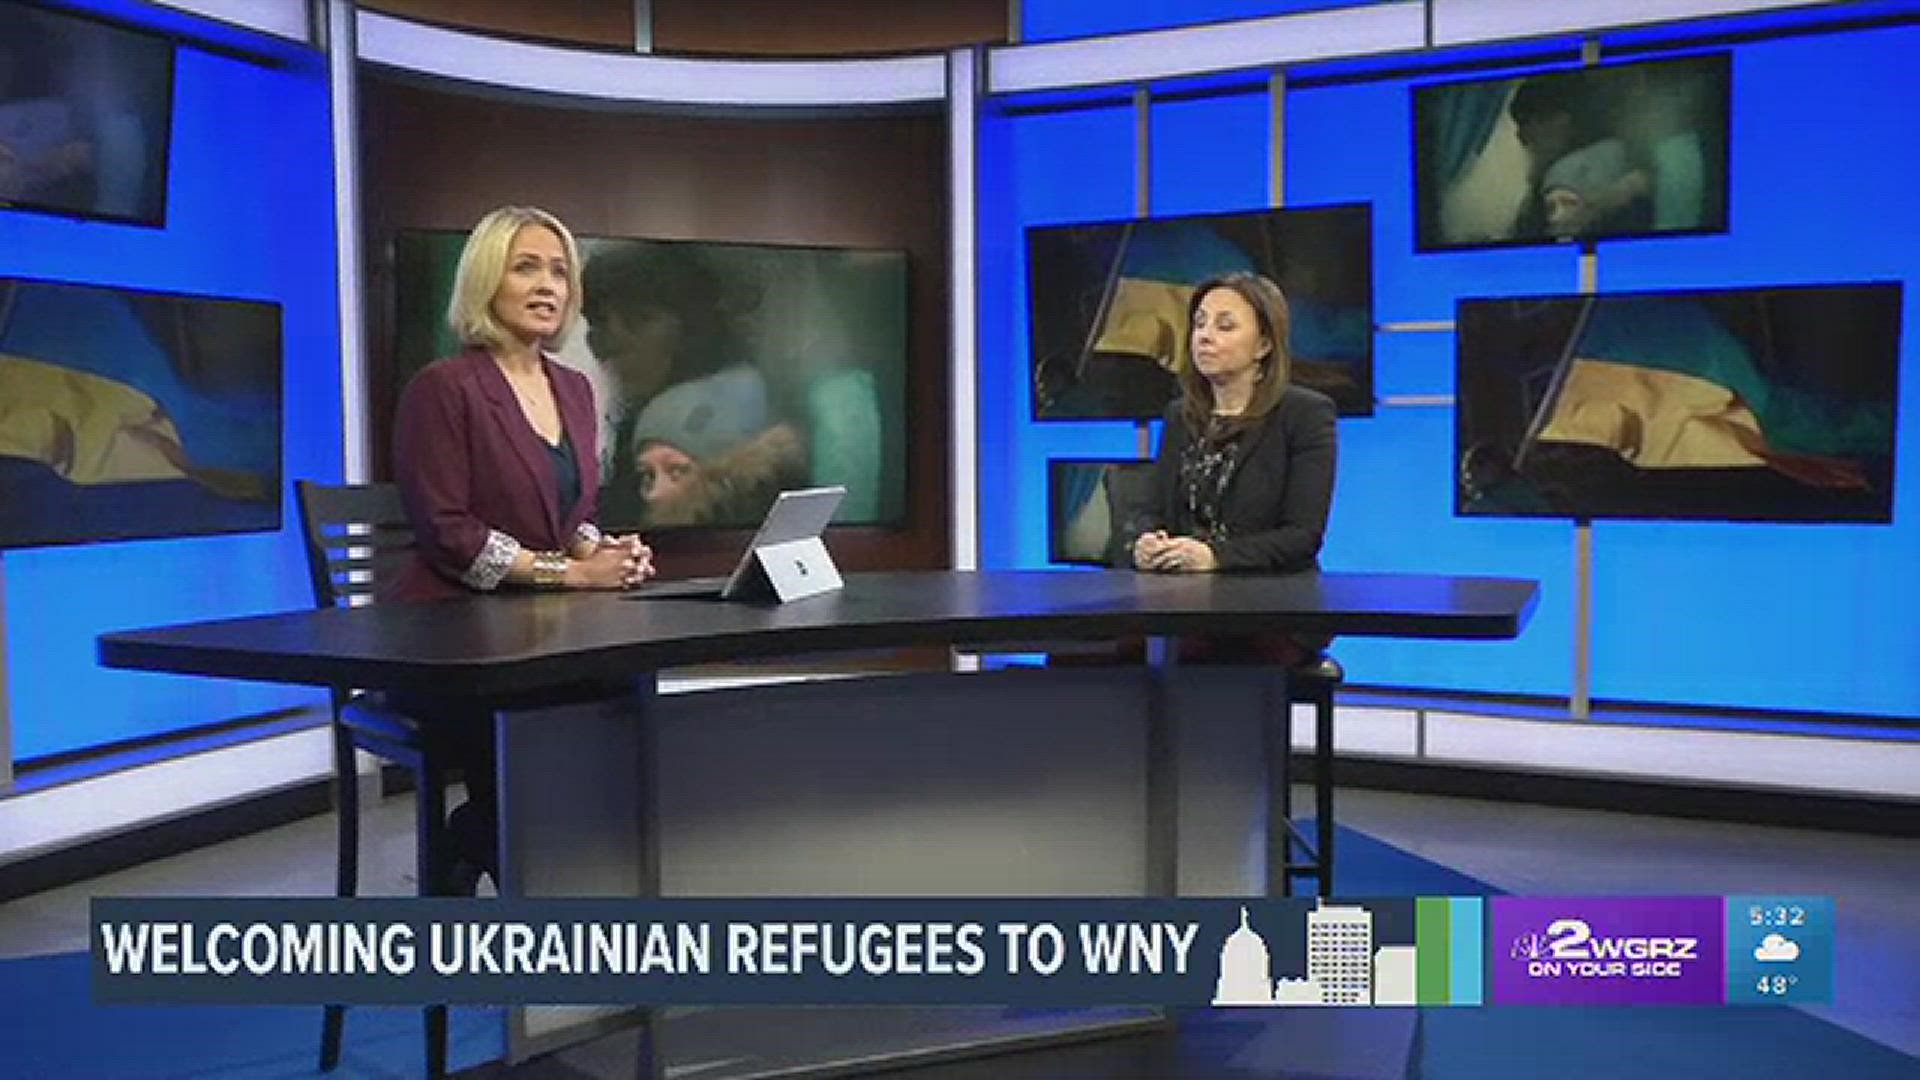 The International Institute of Buffalo thinks Western New York may welcome Ukrainian refugees sooner than expected